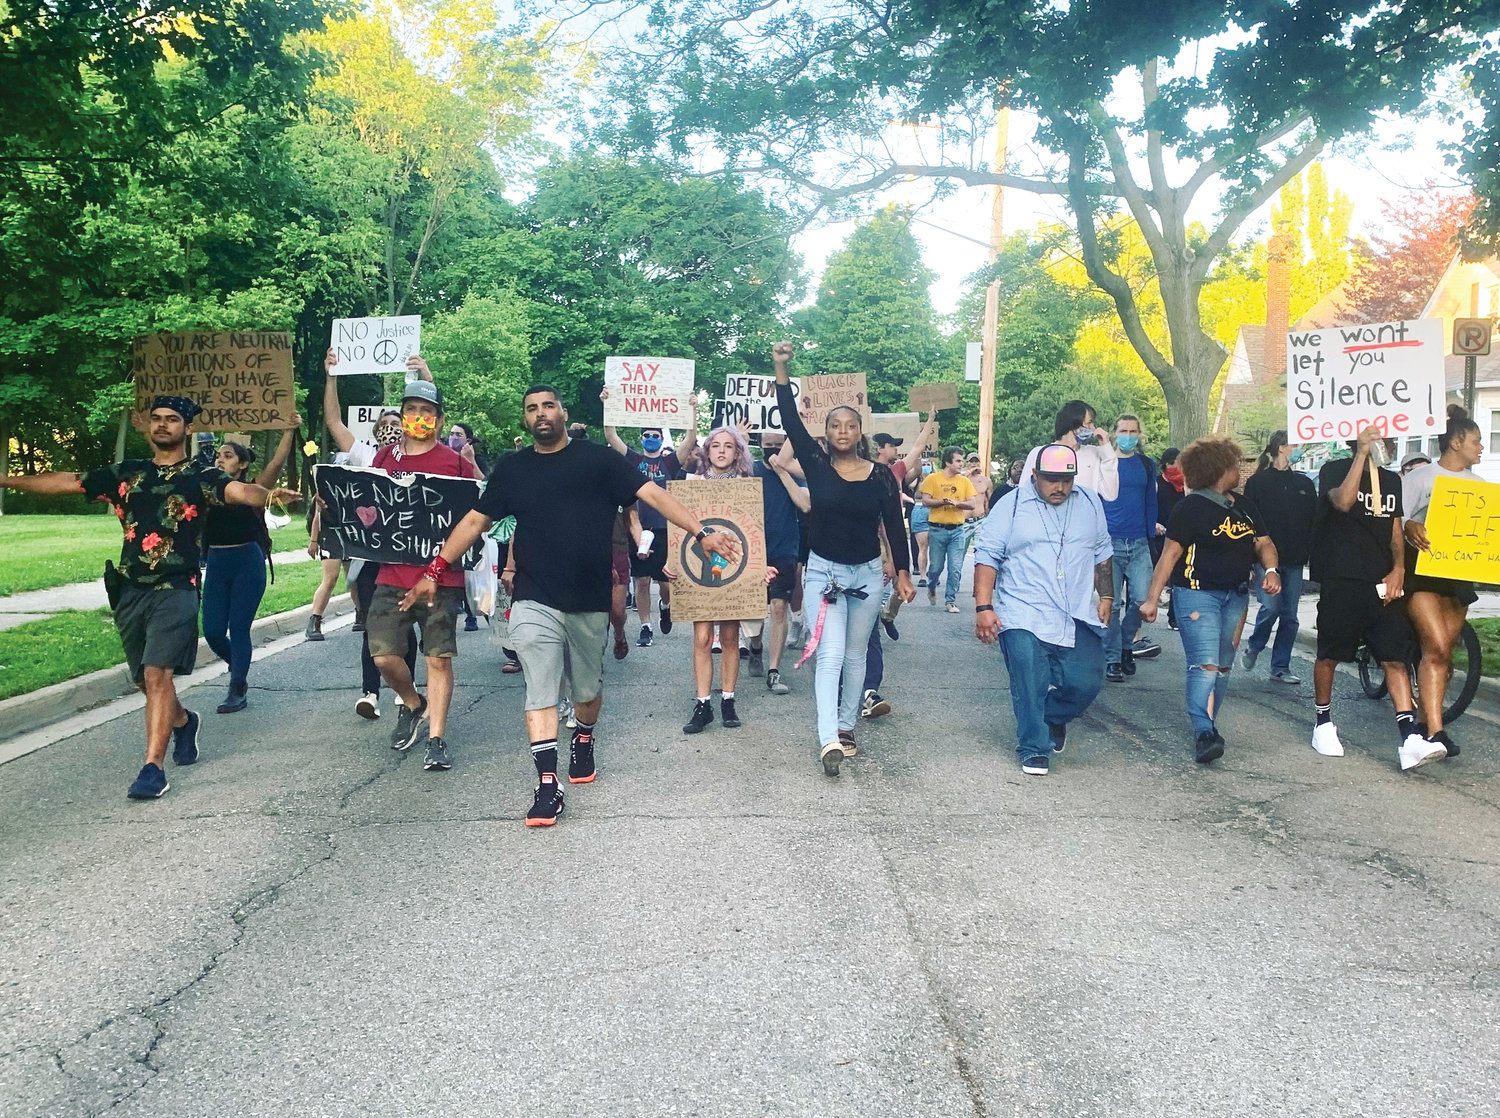 Paul Birdsong (left of center, black shirt) leads protesters in a march on Moores River Drive en route to Lansing Mayor Andy Schor's home.